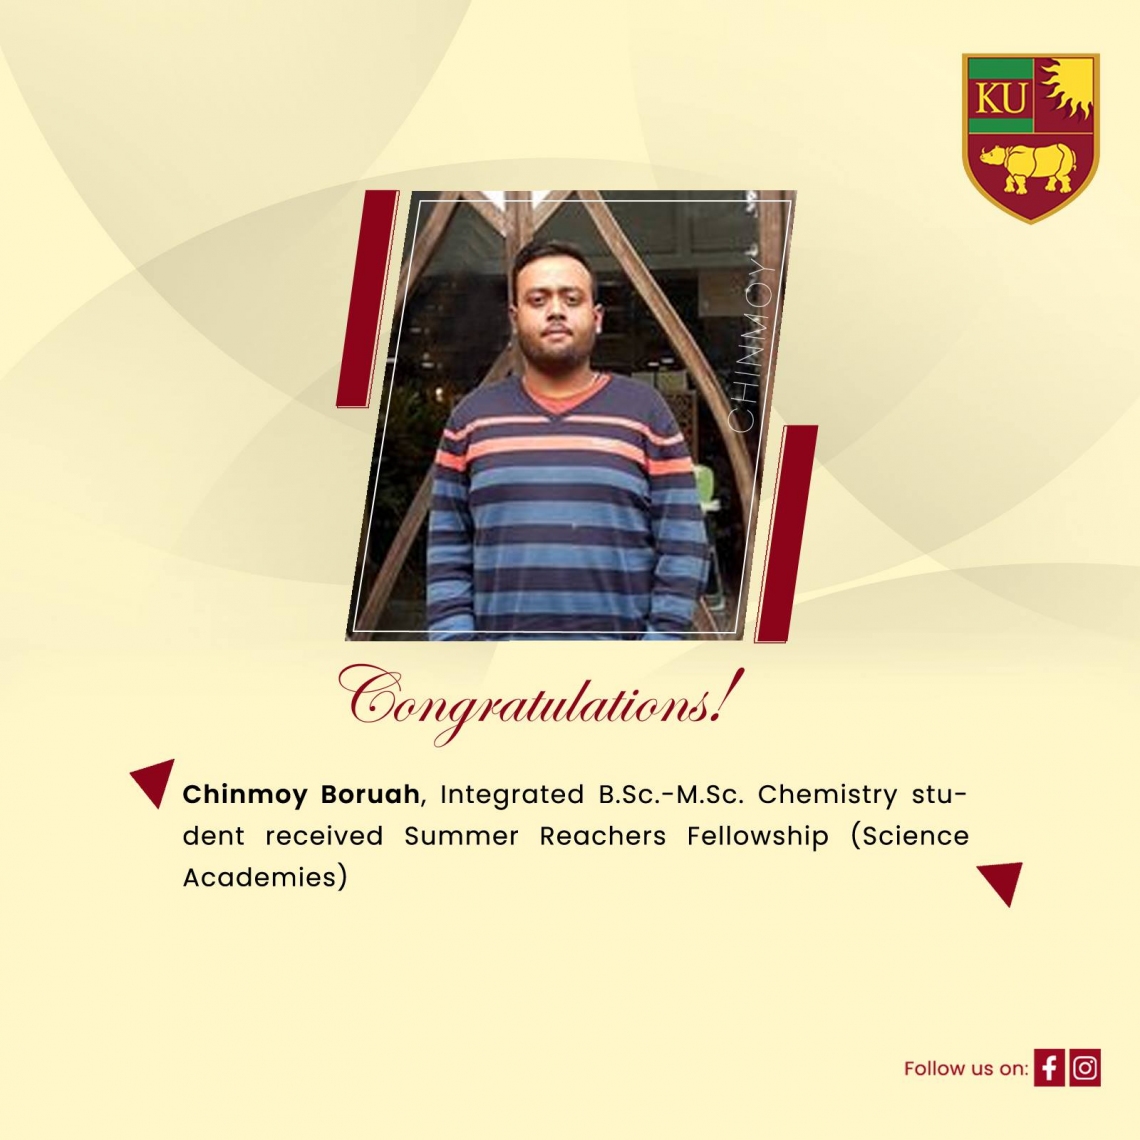 Chinmoy Boruah, Int BSc - MSc Chemistry student for receiving Summer Research Fellowship (Science Academies')